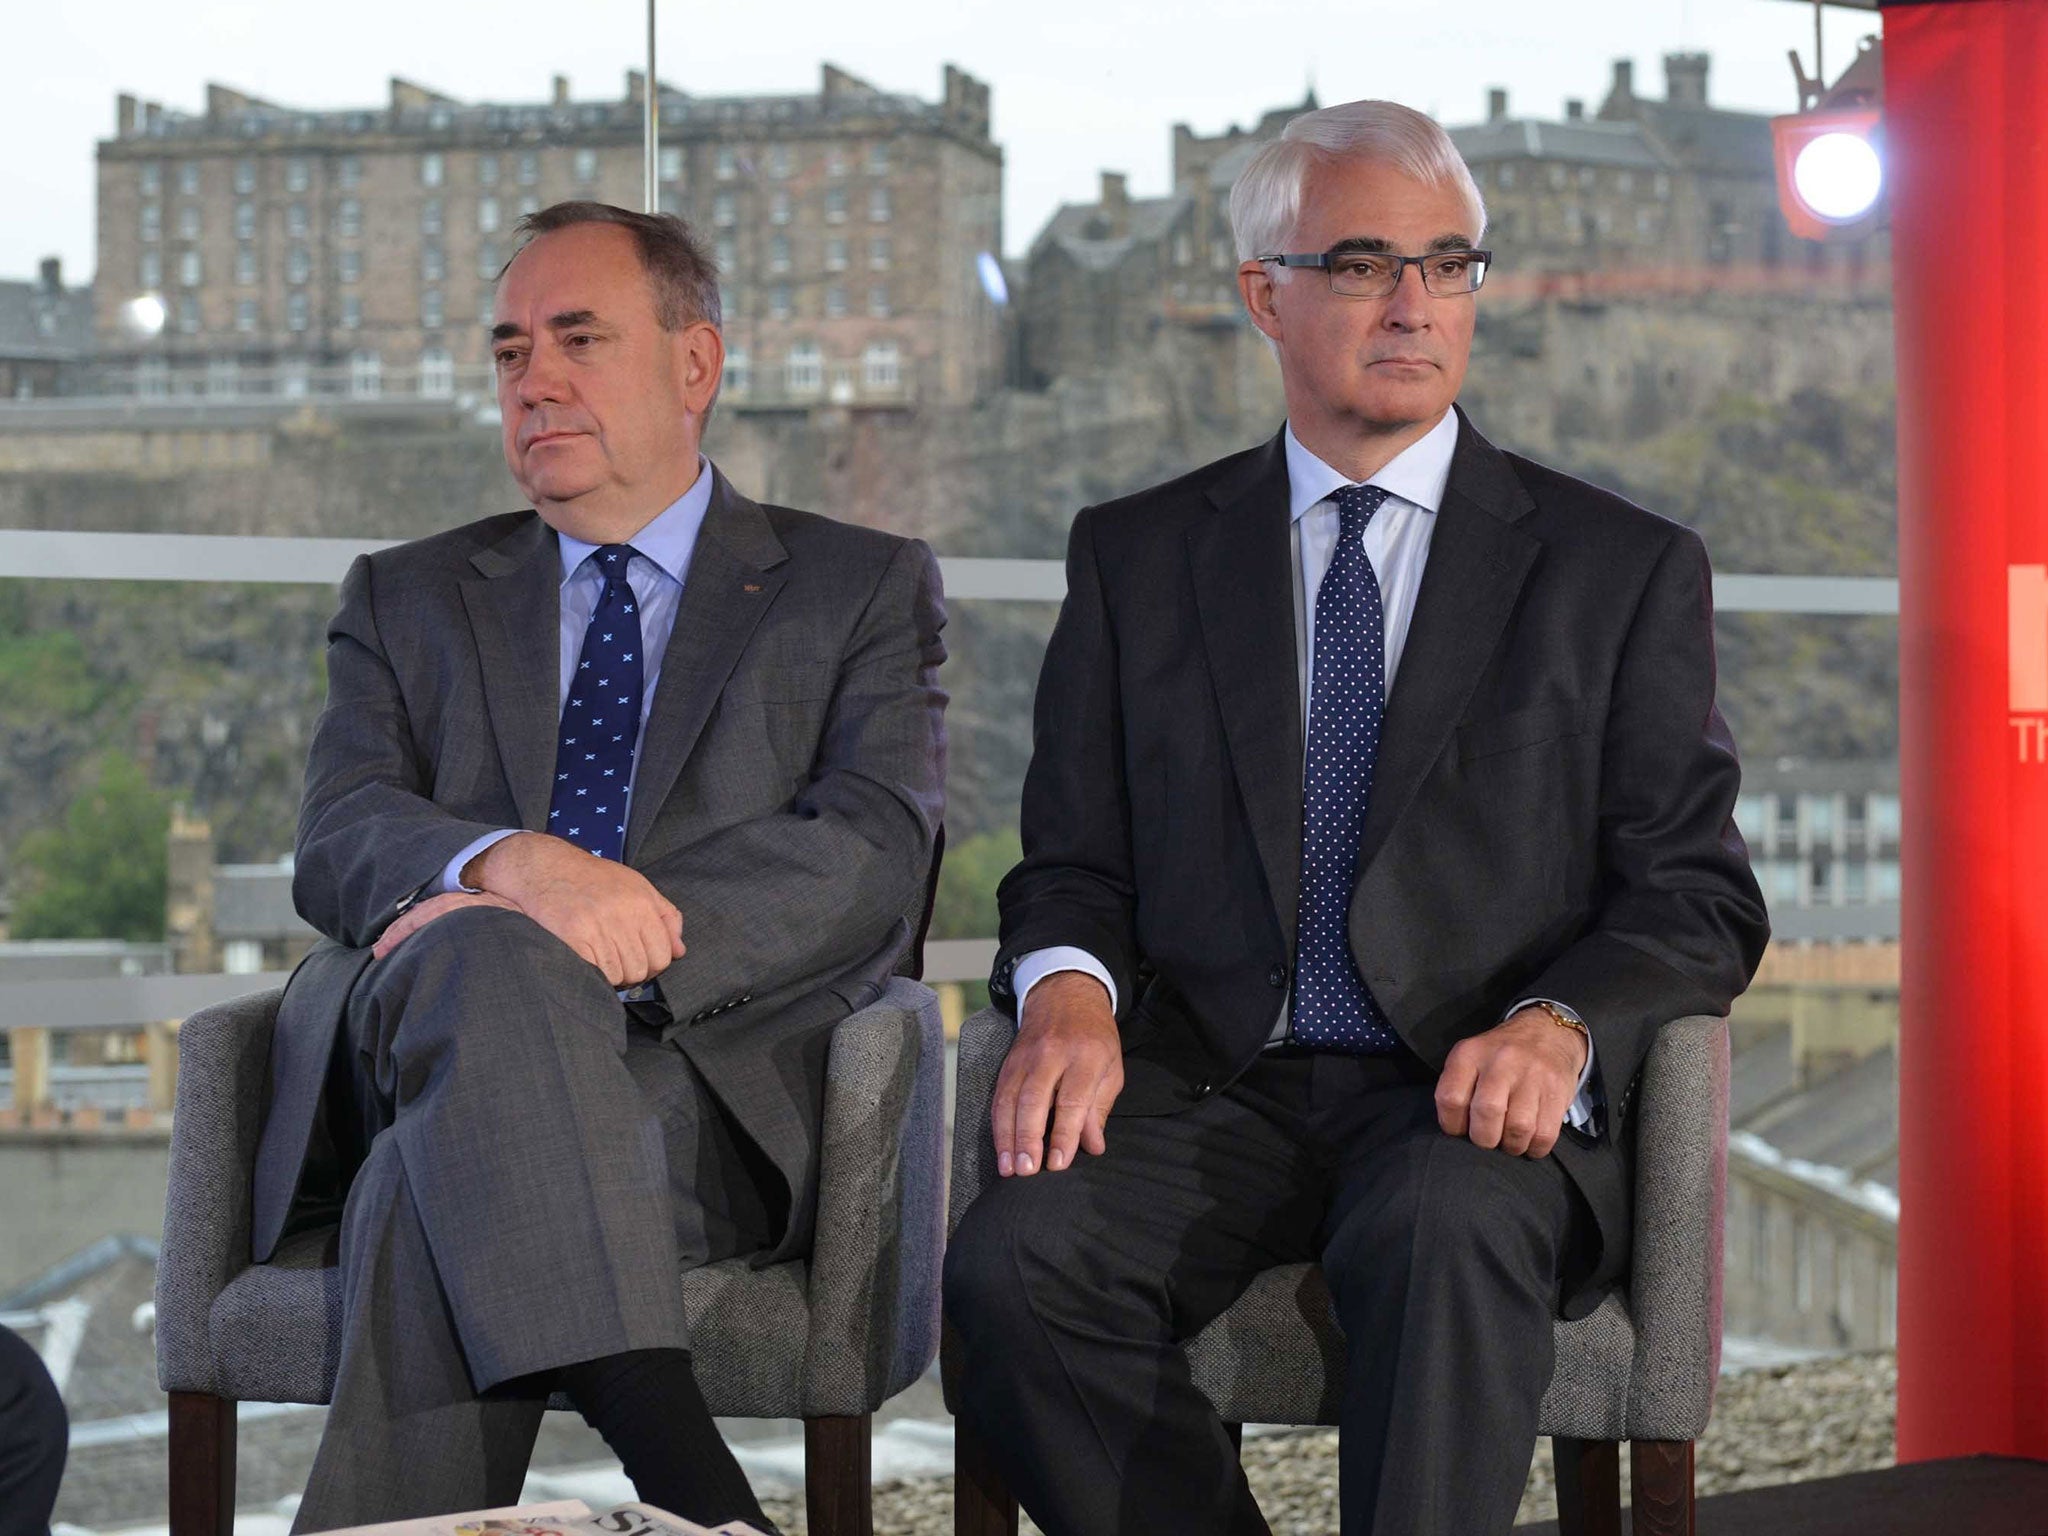 Scotland's First Minister Alex Salmond (left) and Better Together leader Alistair Darling appearing on The Andrew Marr Show